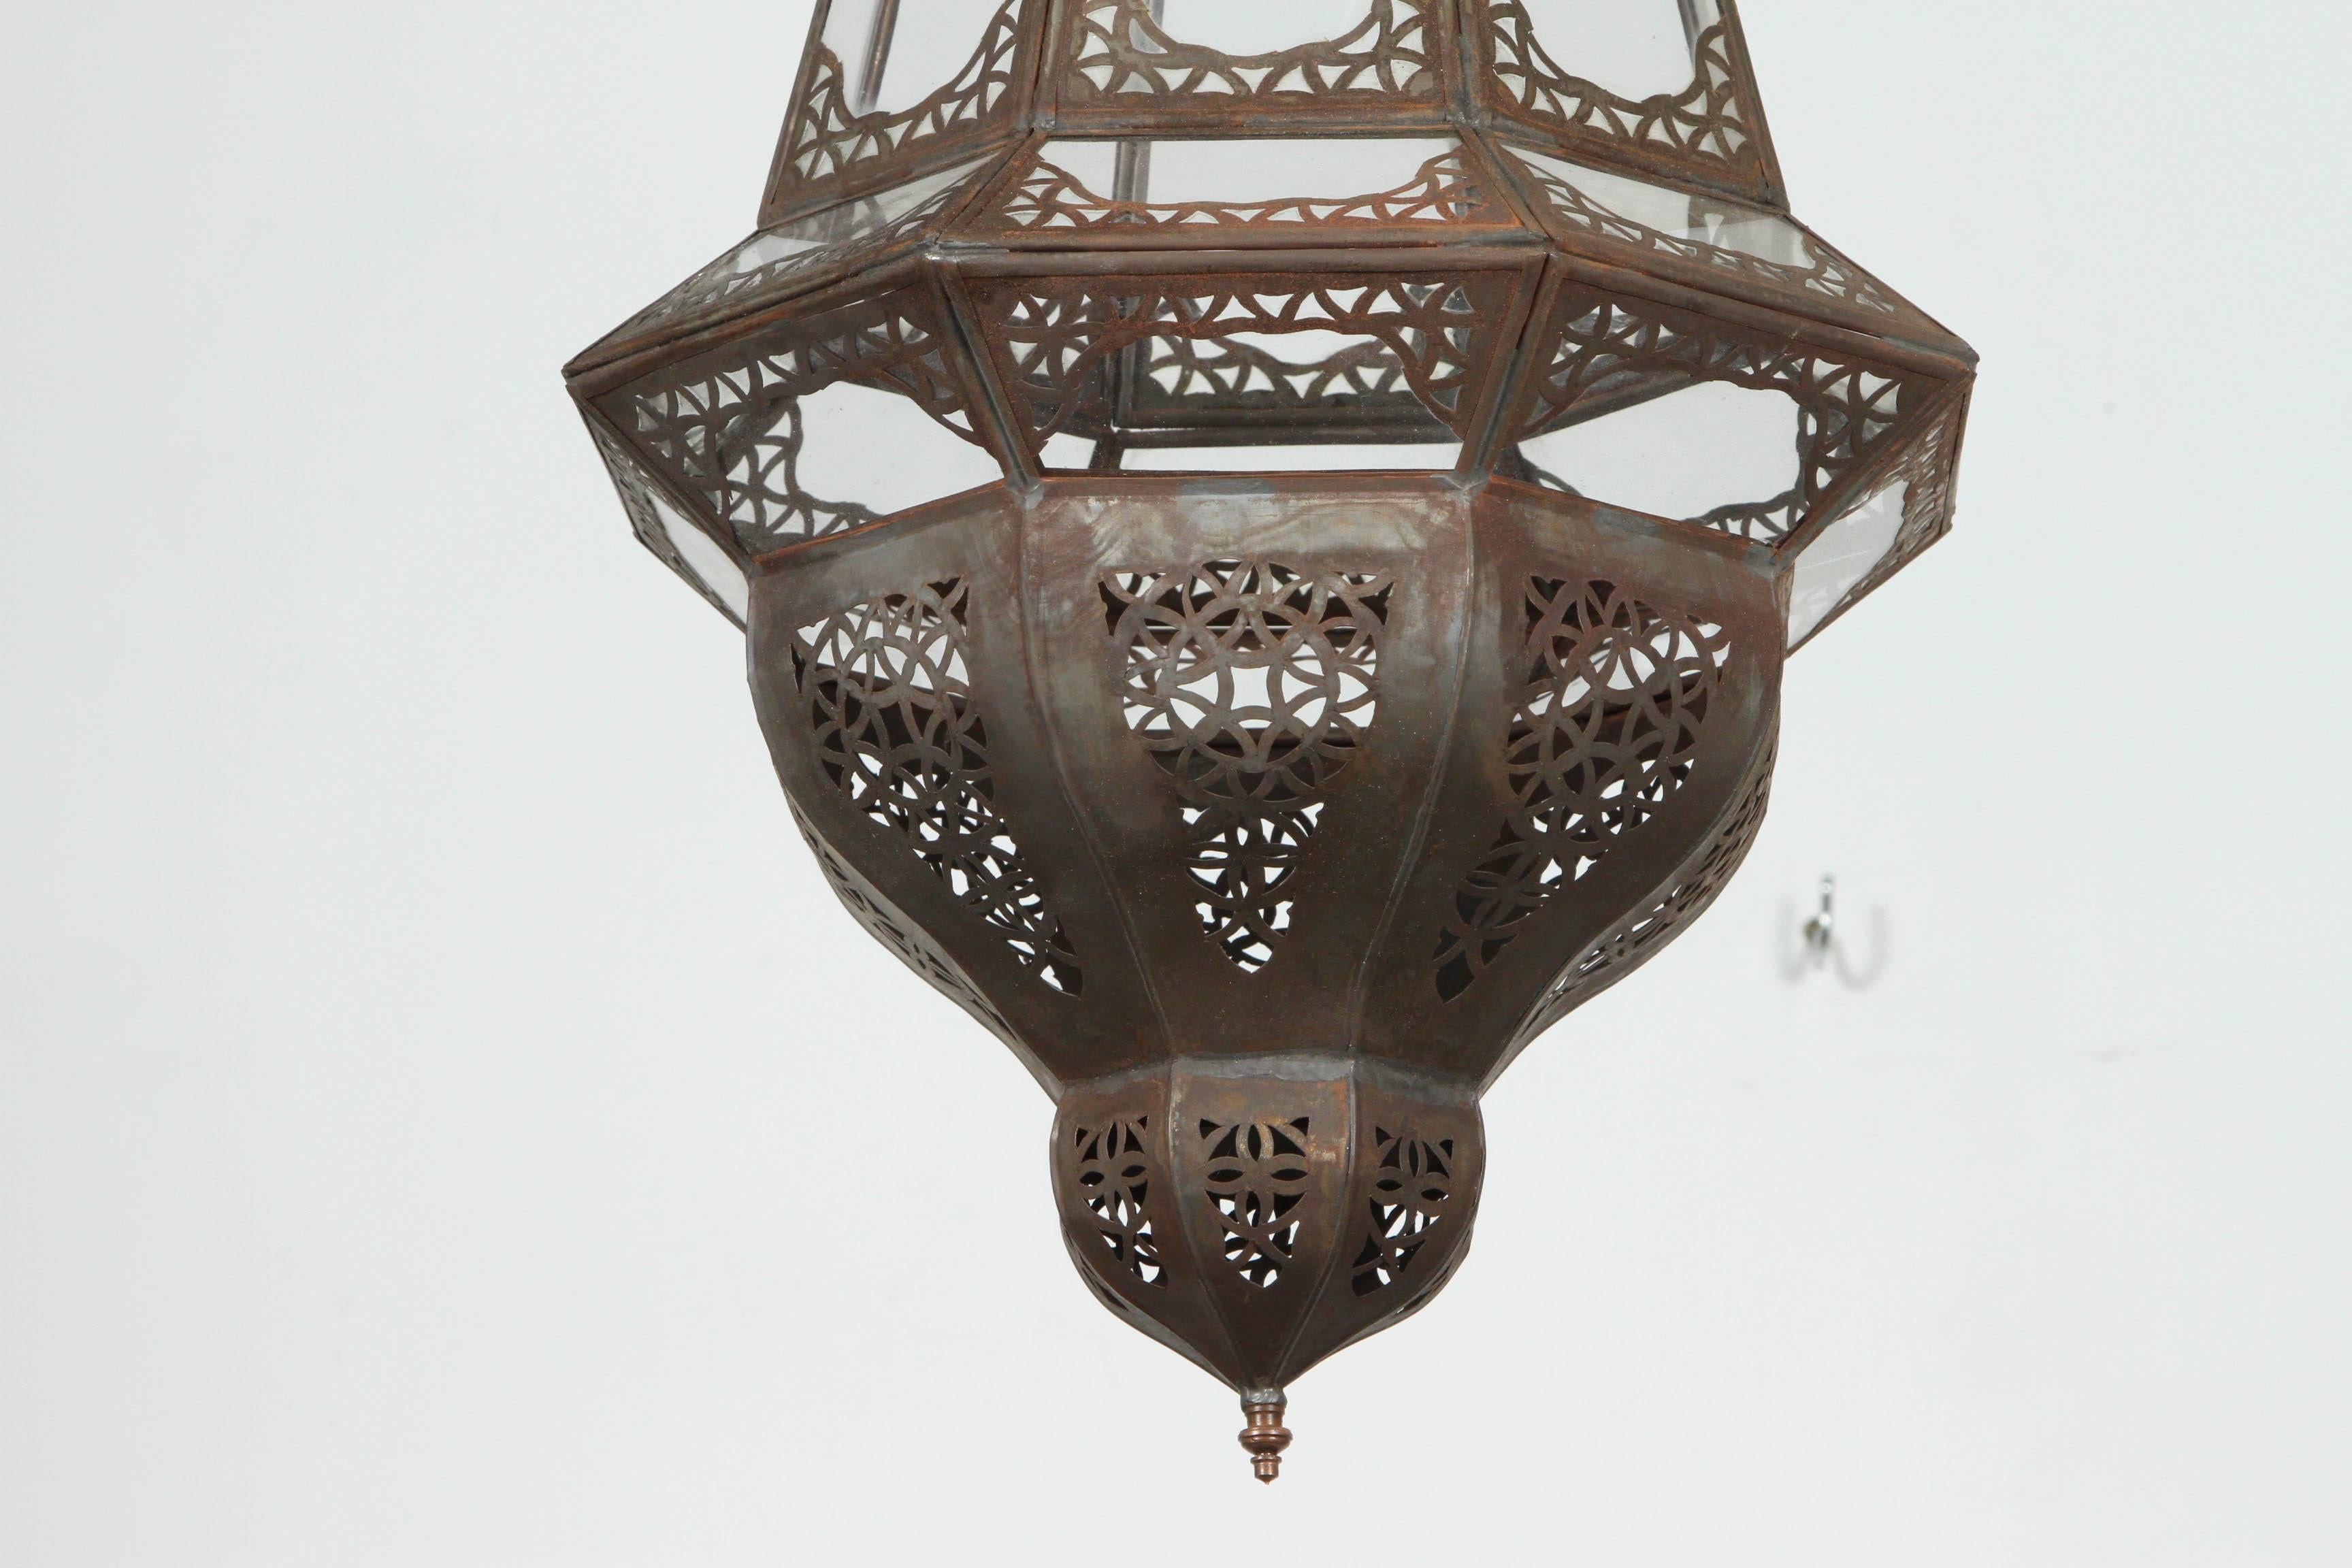 Elegant and stylish clear glass hand-crafted Moroccan lantern with intricate filigree work in the Moorish style.
Will add elegance in any room.
Could be used as a wall sconces or chandelier hanging from the ceiling.
Rewired with 1 lights, ready to